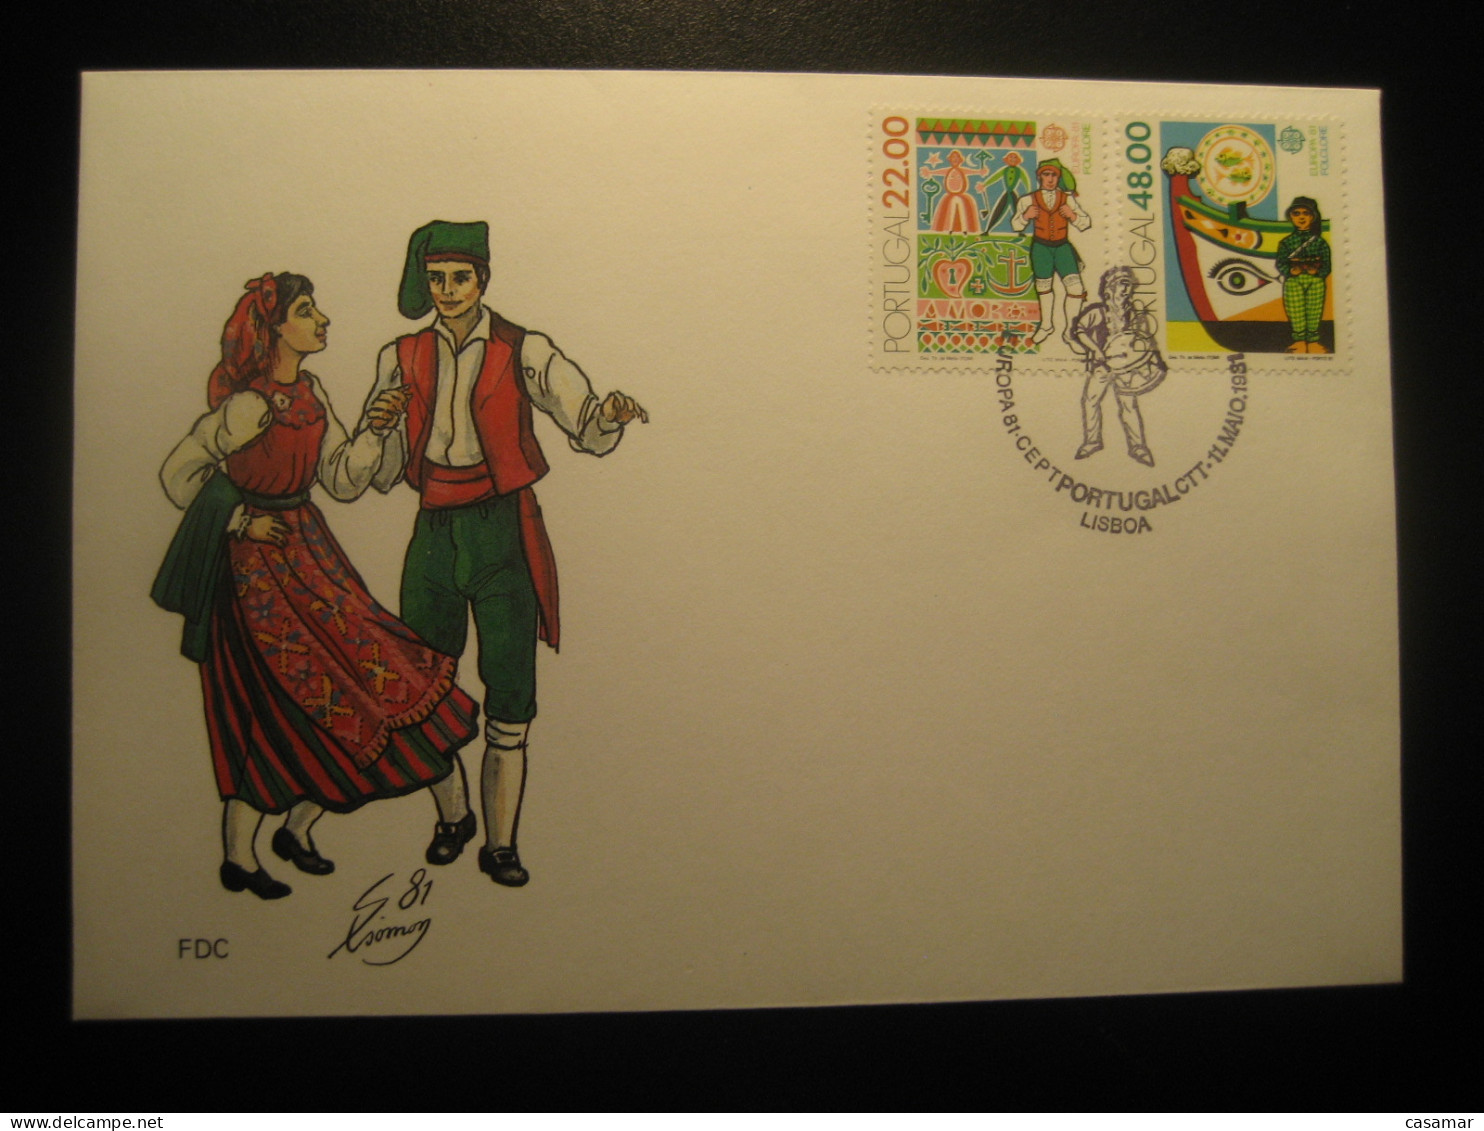 LISBOA 1981 Europa CEPT Typical Dances Folklore FDC Cancel Cover PORTUGAL - Covers & Documents